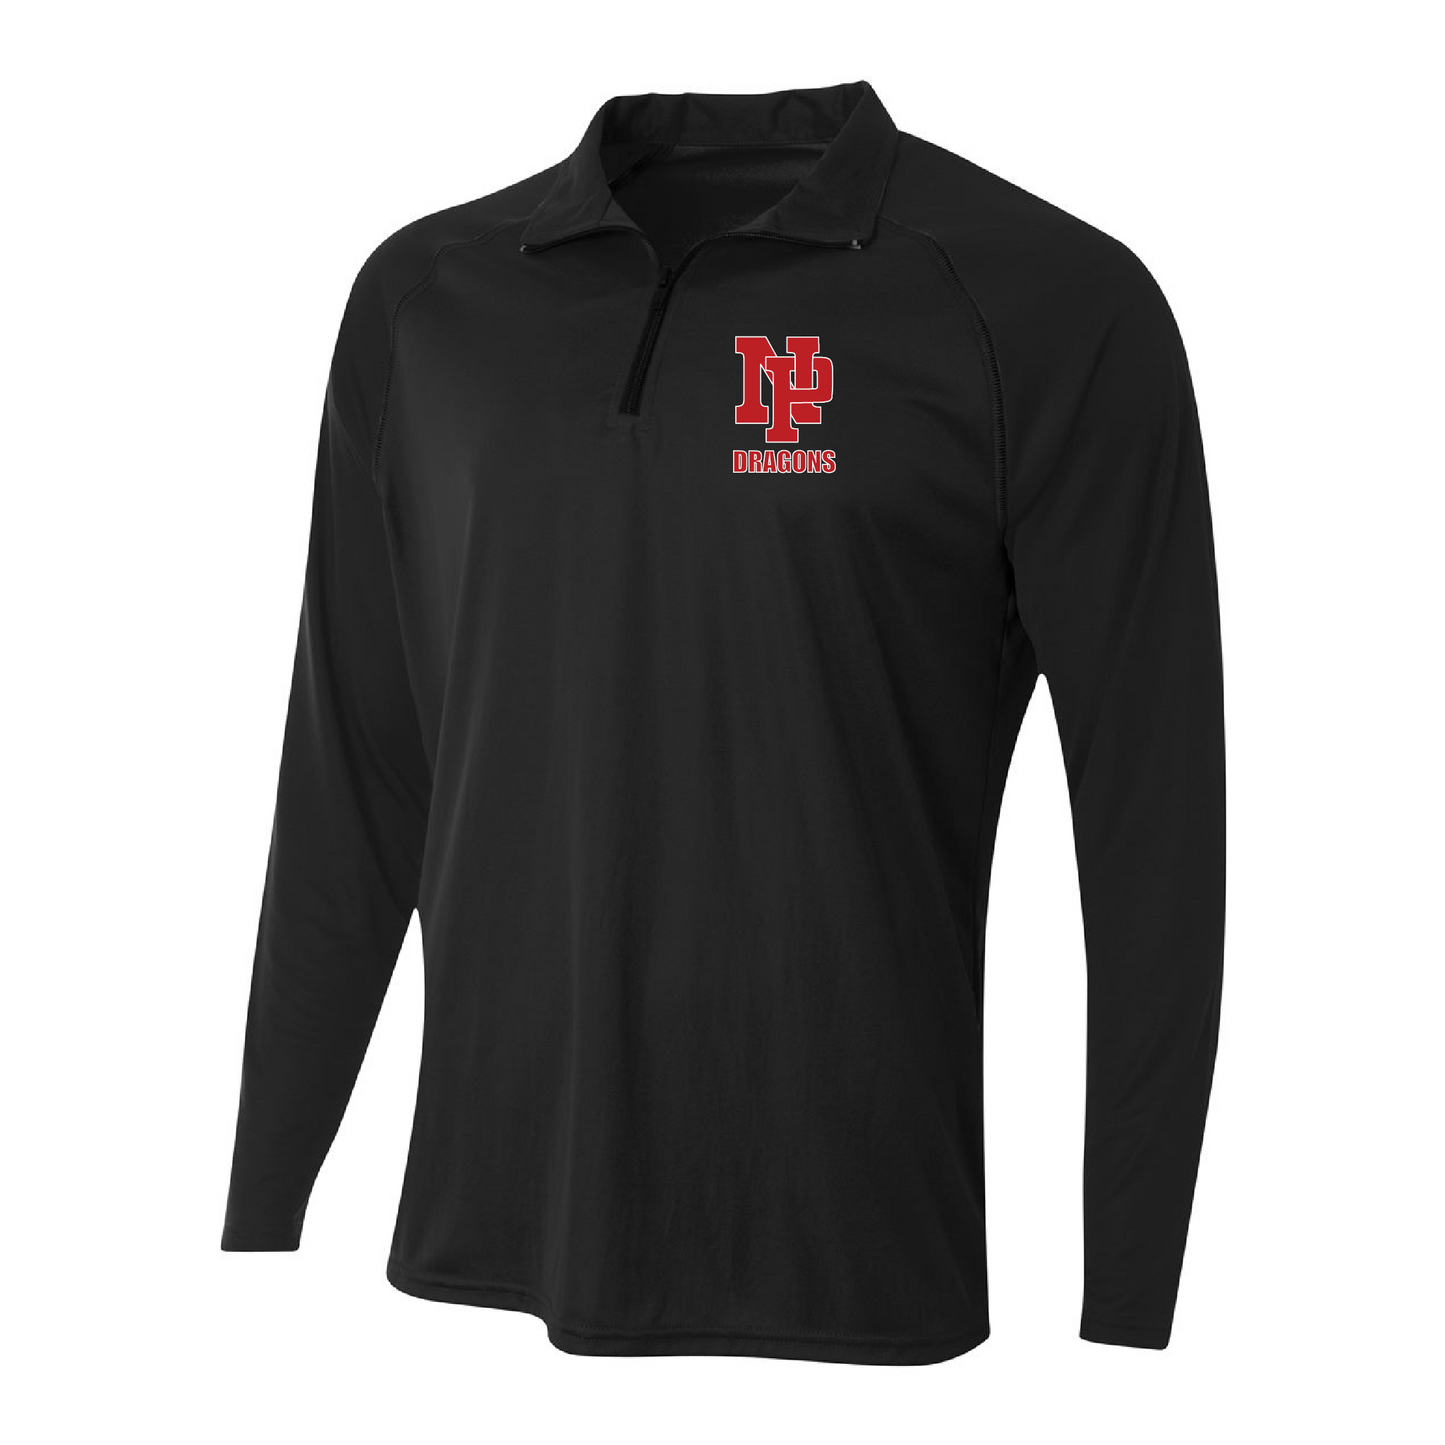 Mens Quarter Zip Pullover - Red NP DRAGONS, stacked